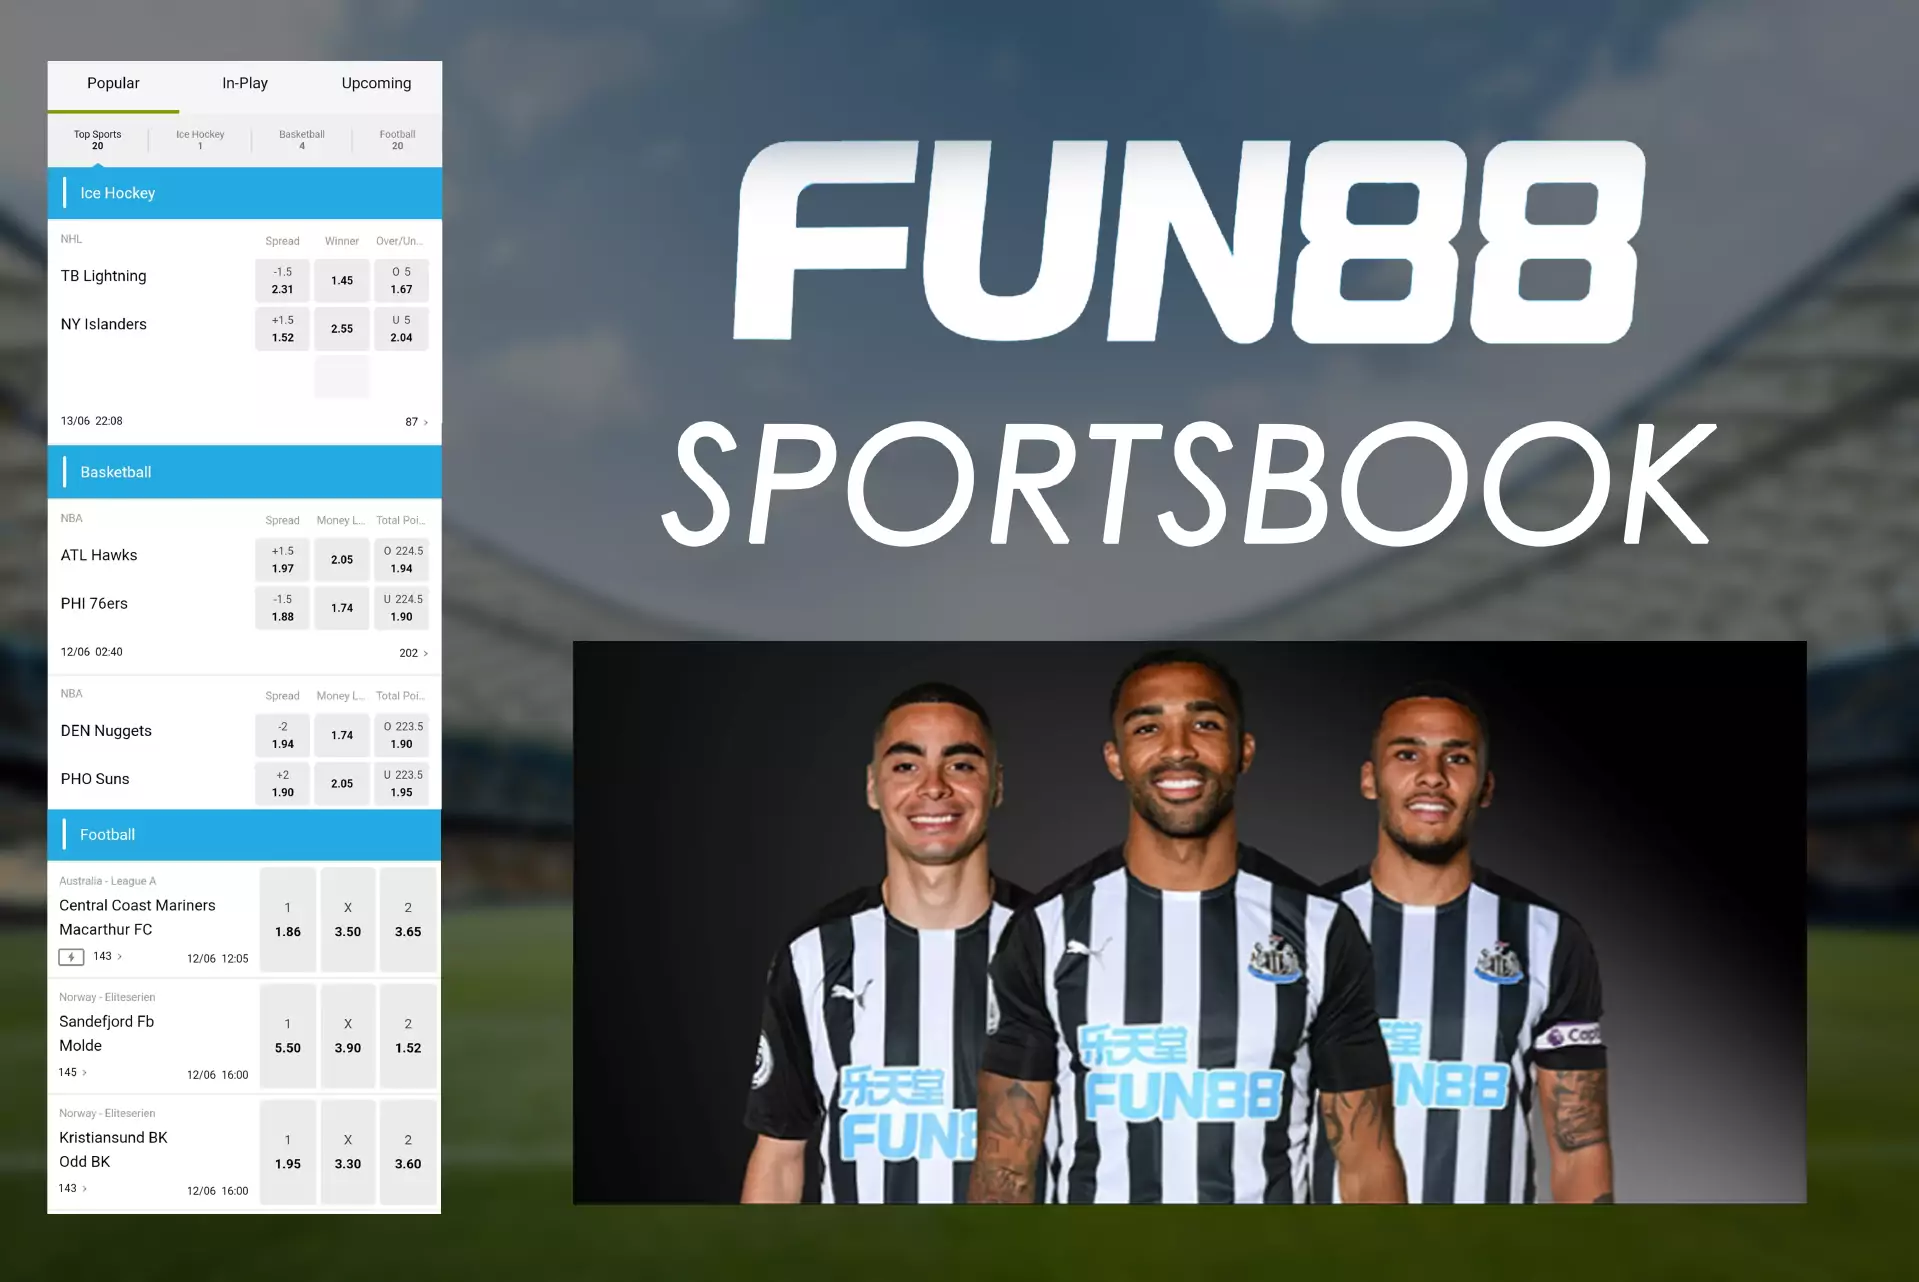 Open the Sportsbook section to look through the available sports matches.